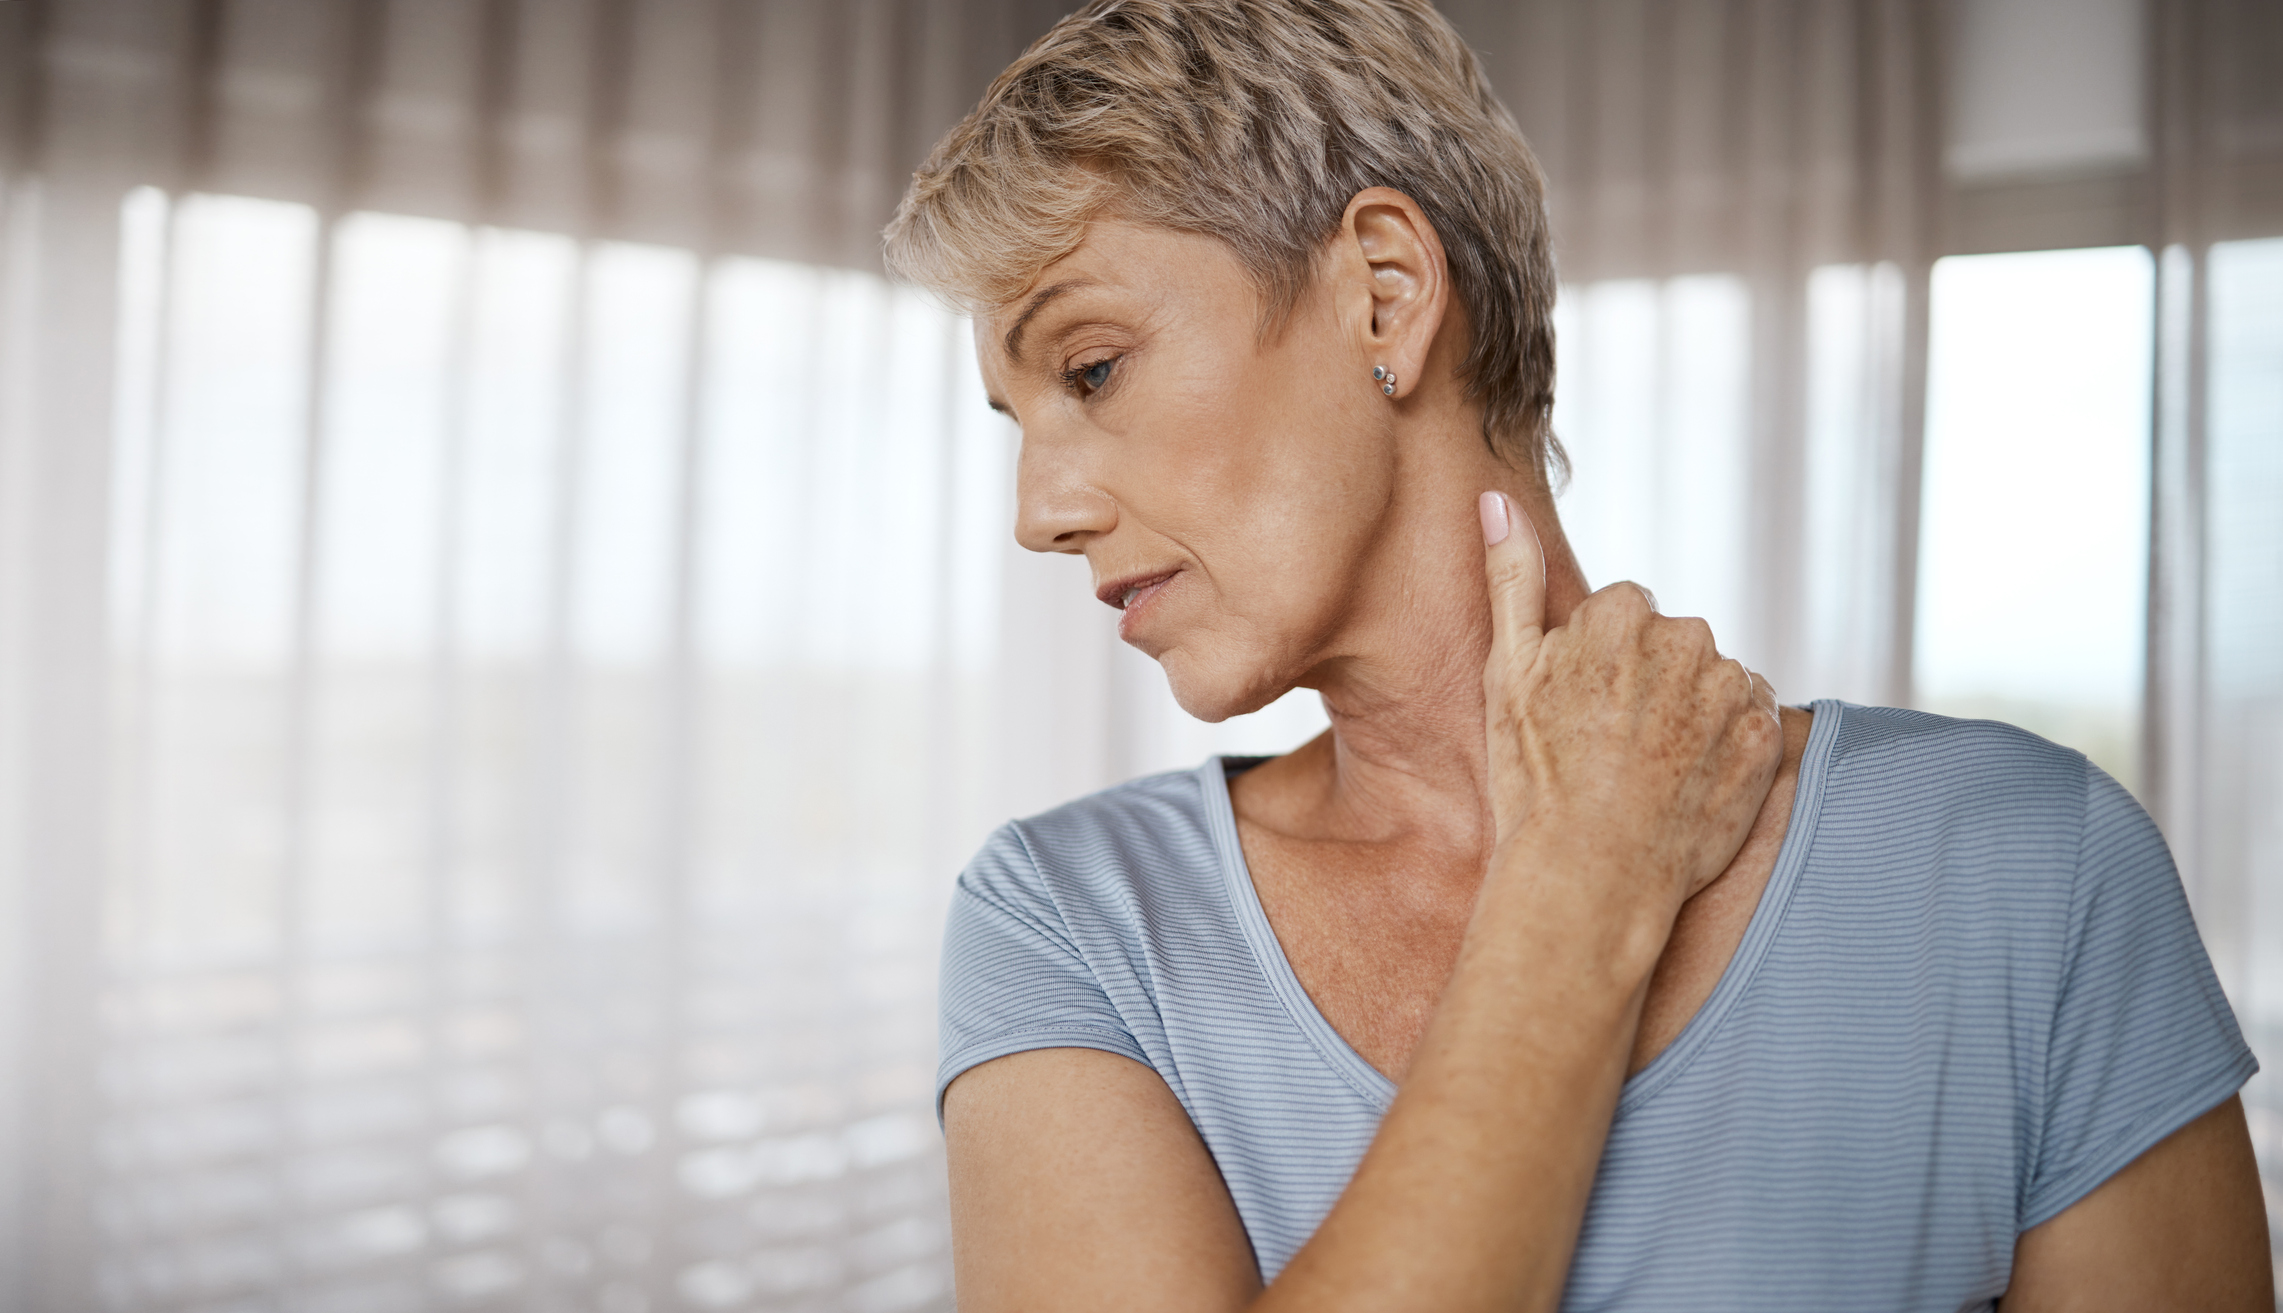 How Are Neck and Arm Pain Related?